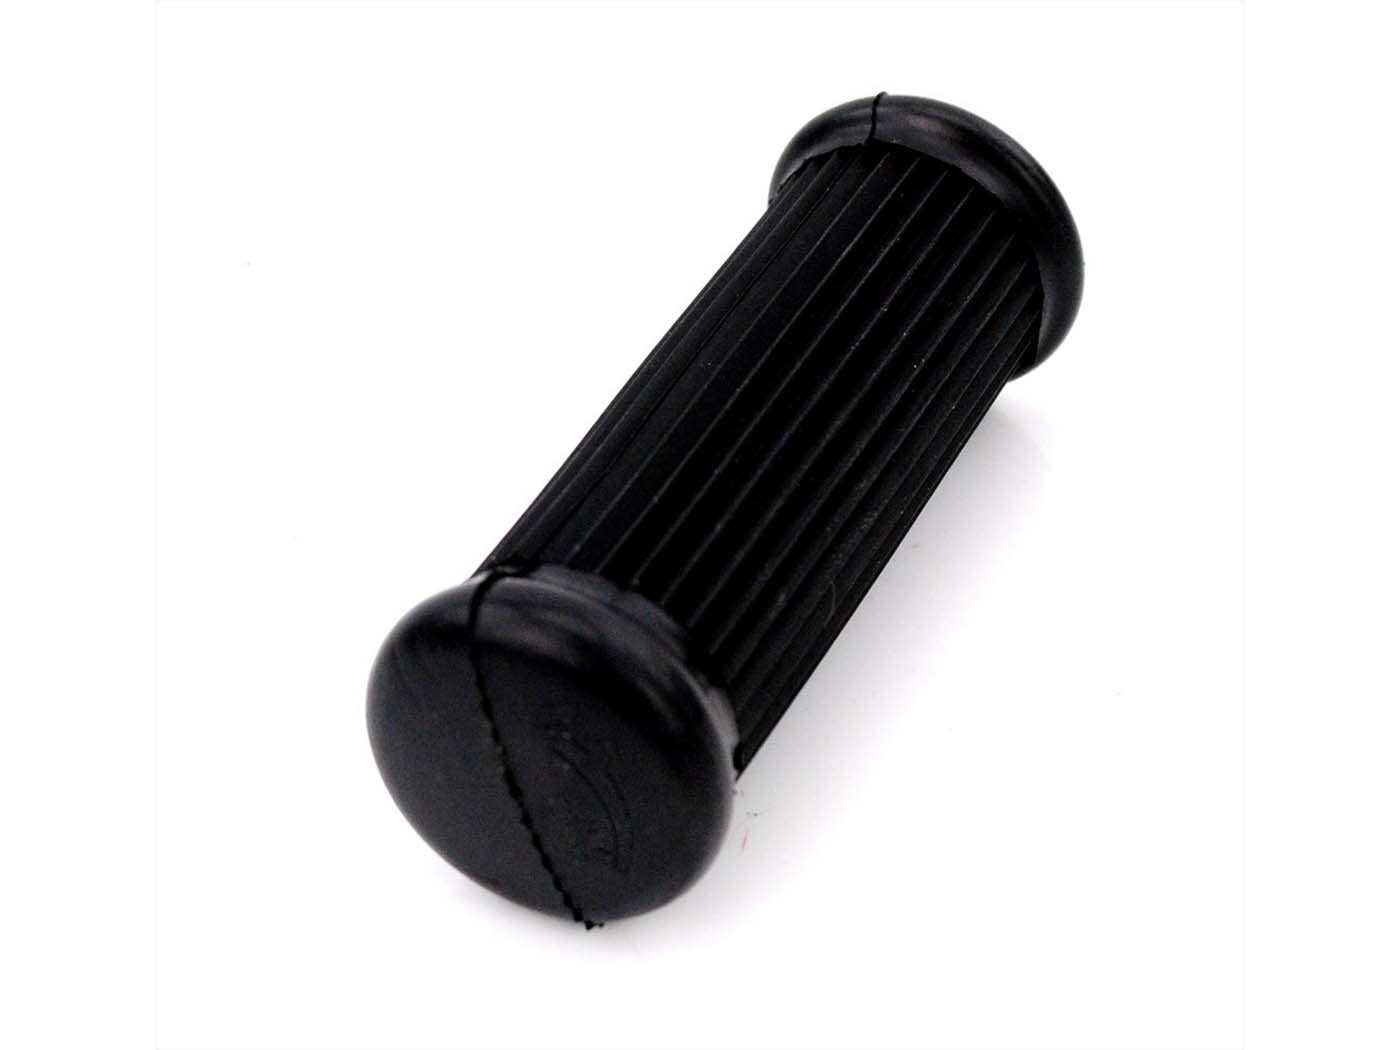 Shift Lever Rubber Drilastic L=79mm D=25mm D=15mm For Zündapp GTS 50 WK Type 540-180, KS 80 530-050, Touring 530-070, Super 537-010, K 540-010 And 011, 540-200, SX 540-150